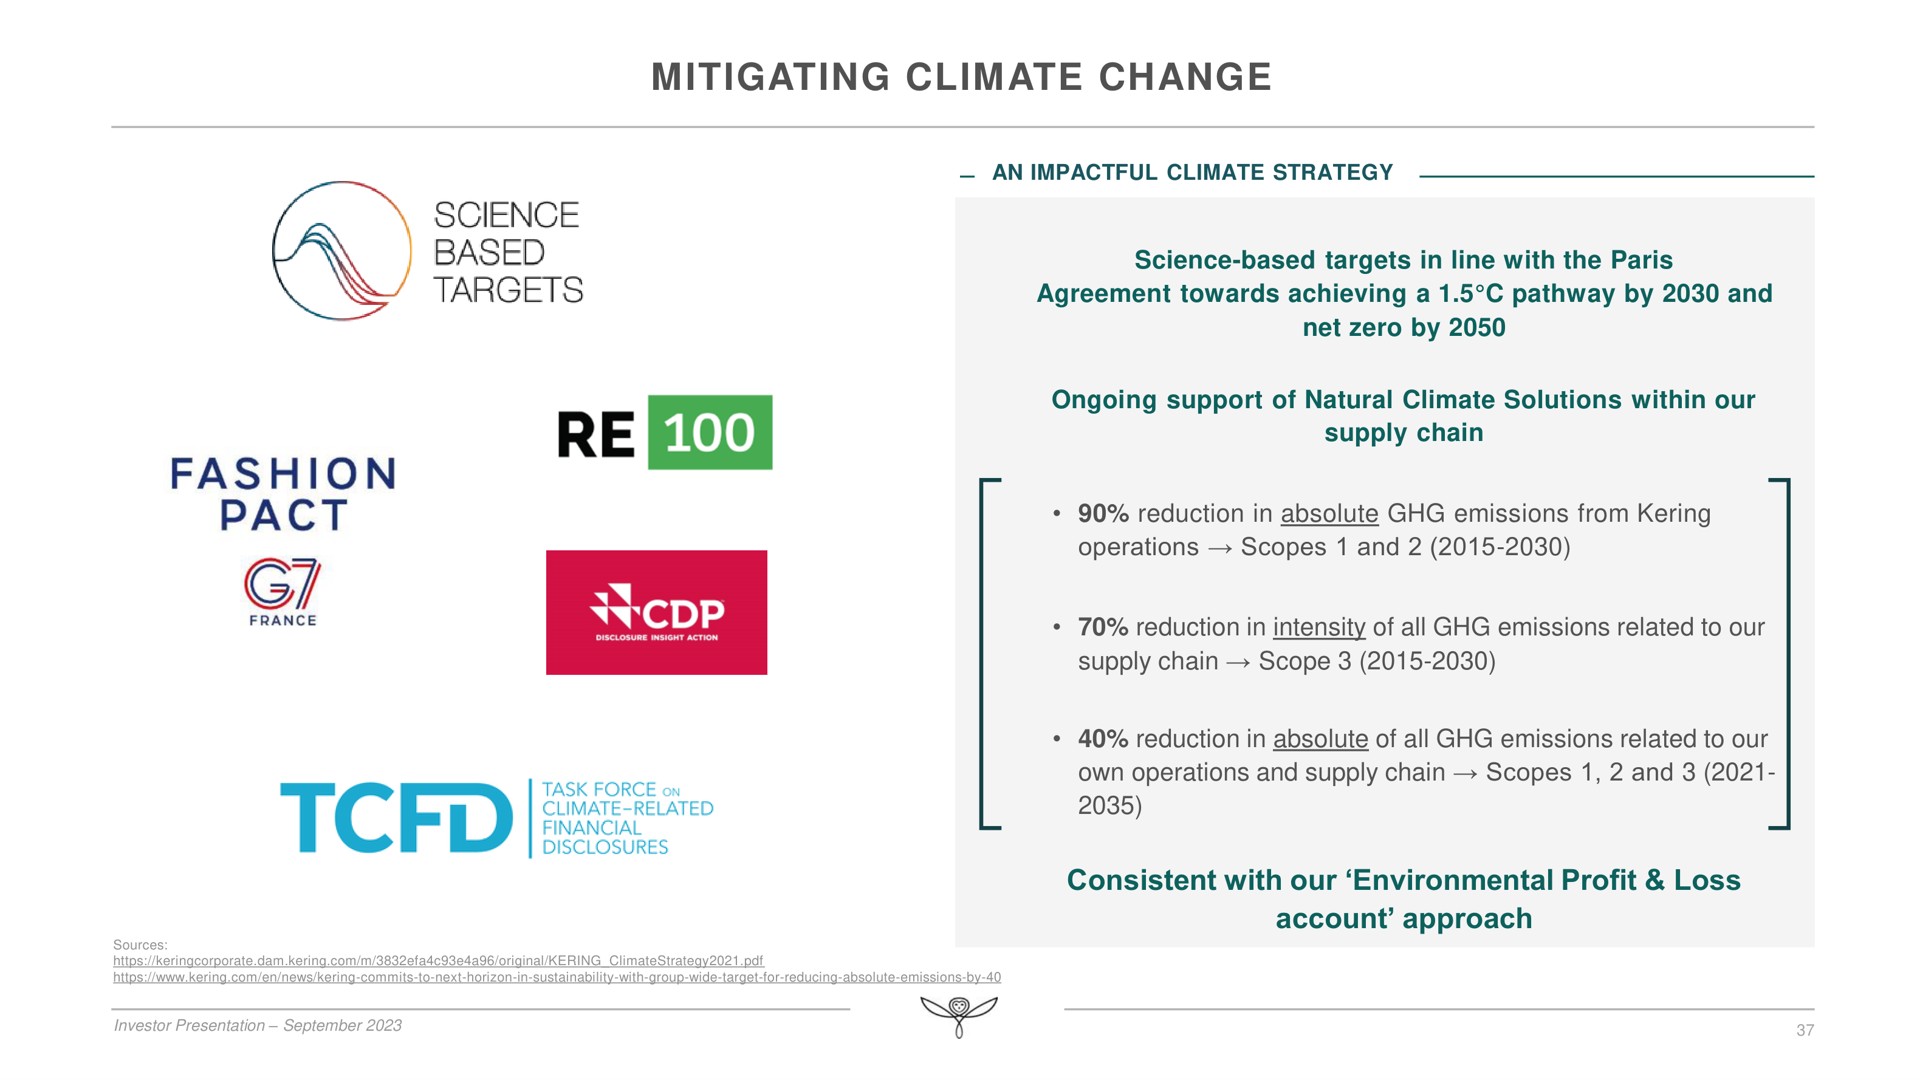 mitigating climate change consistent with our environmental profit loss account approach science targets fashion pact agreement towards achieving a pathway by and reduction in absolute emissions from | Kering